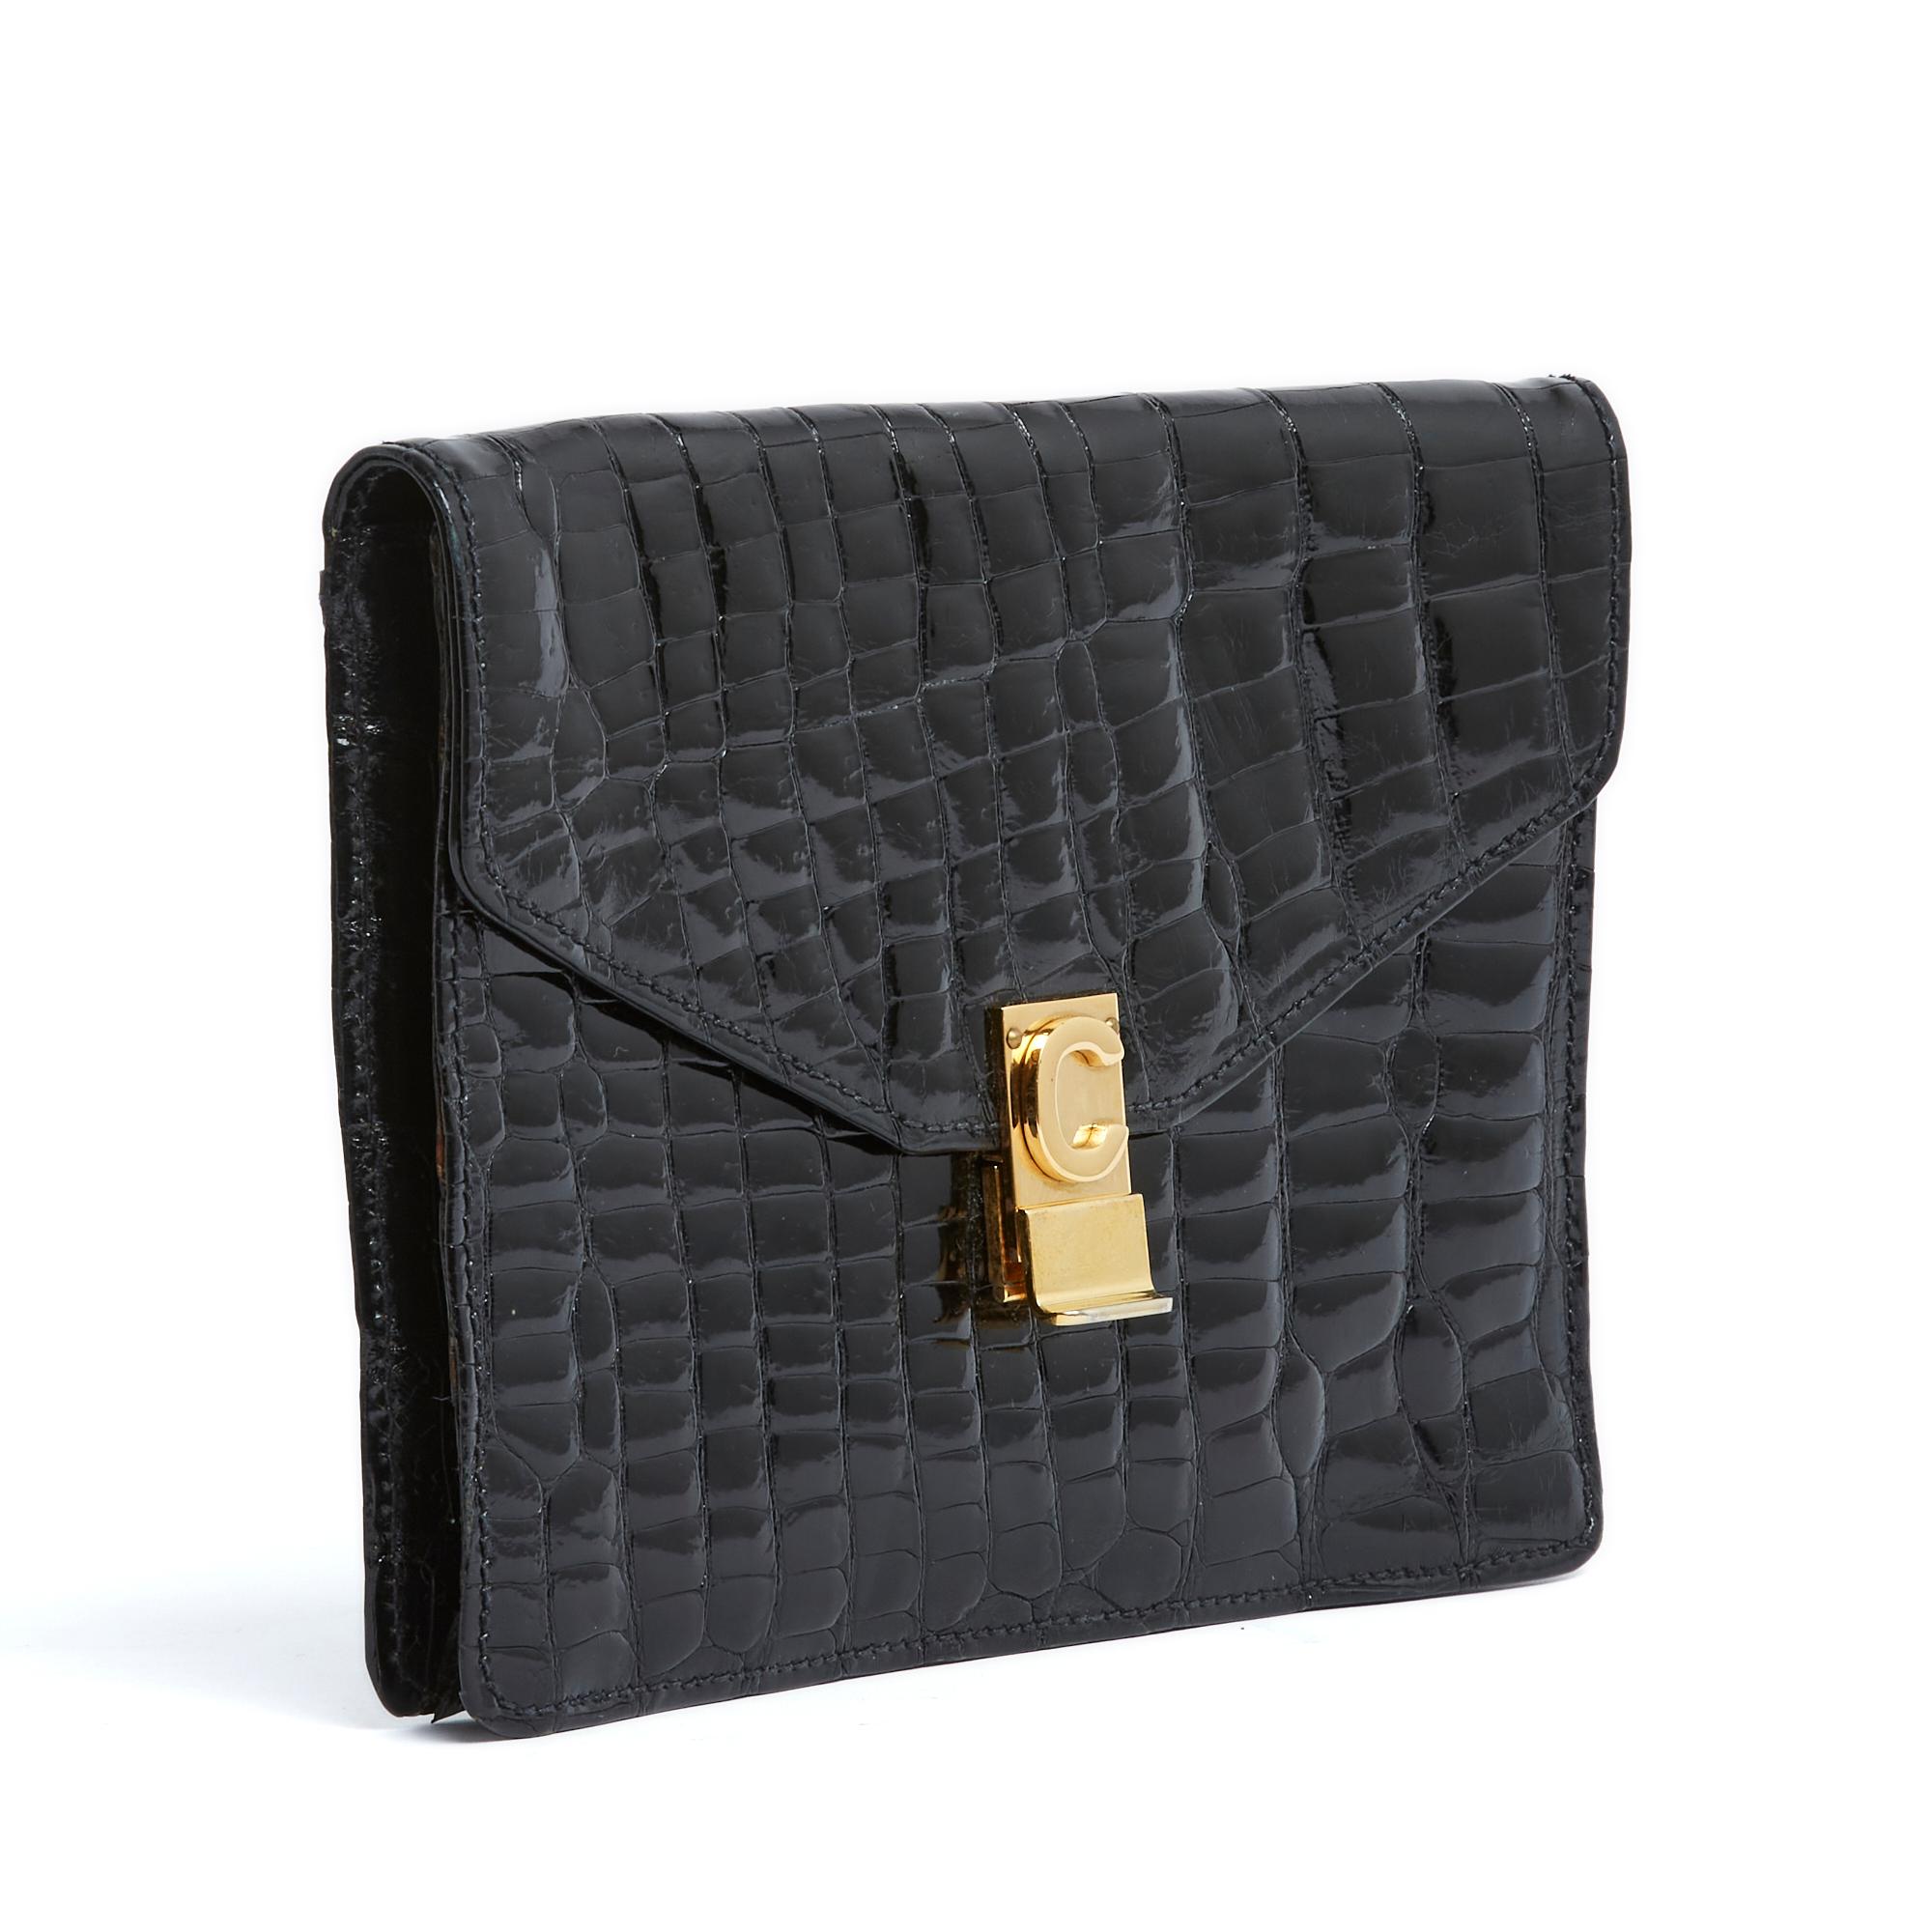 Céline vintage Pocket model clutch (circa 1990) in black shiny crocodile leather, large flap equipped with a C logo clasp (like Céline) in gold metal, interior in soft leather coordinated with a large patch pocket and a zipped pocket. Width 23 cm x